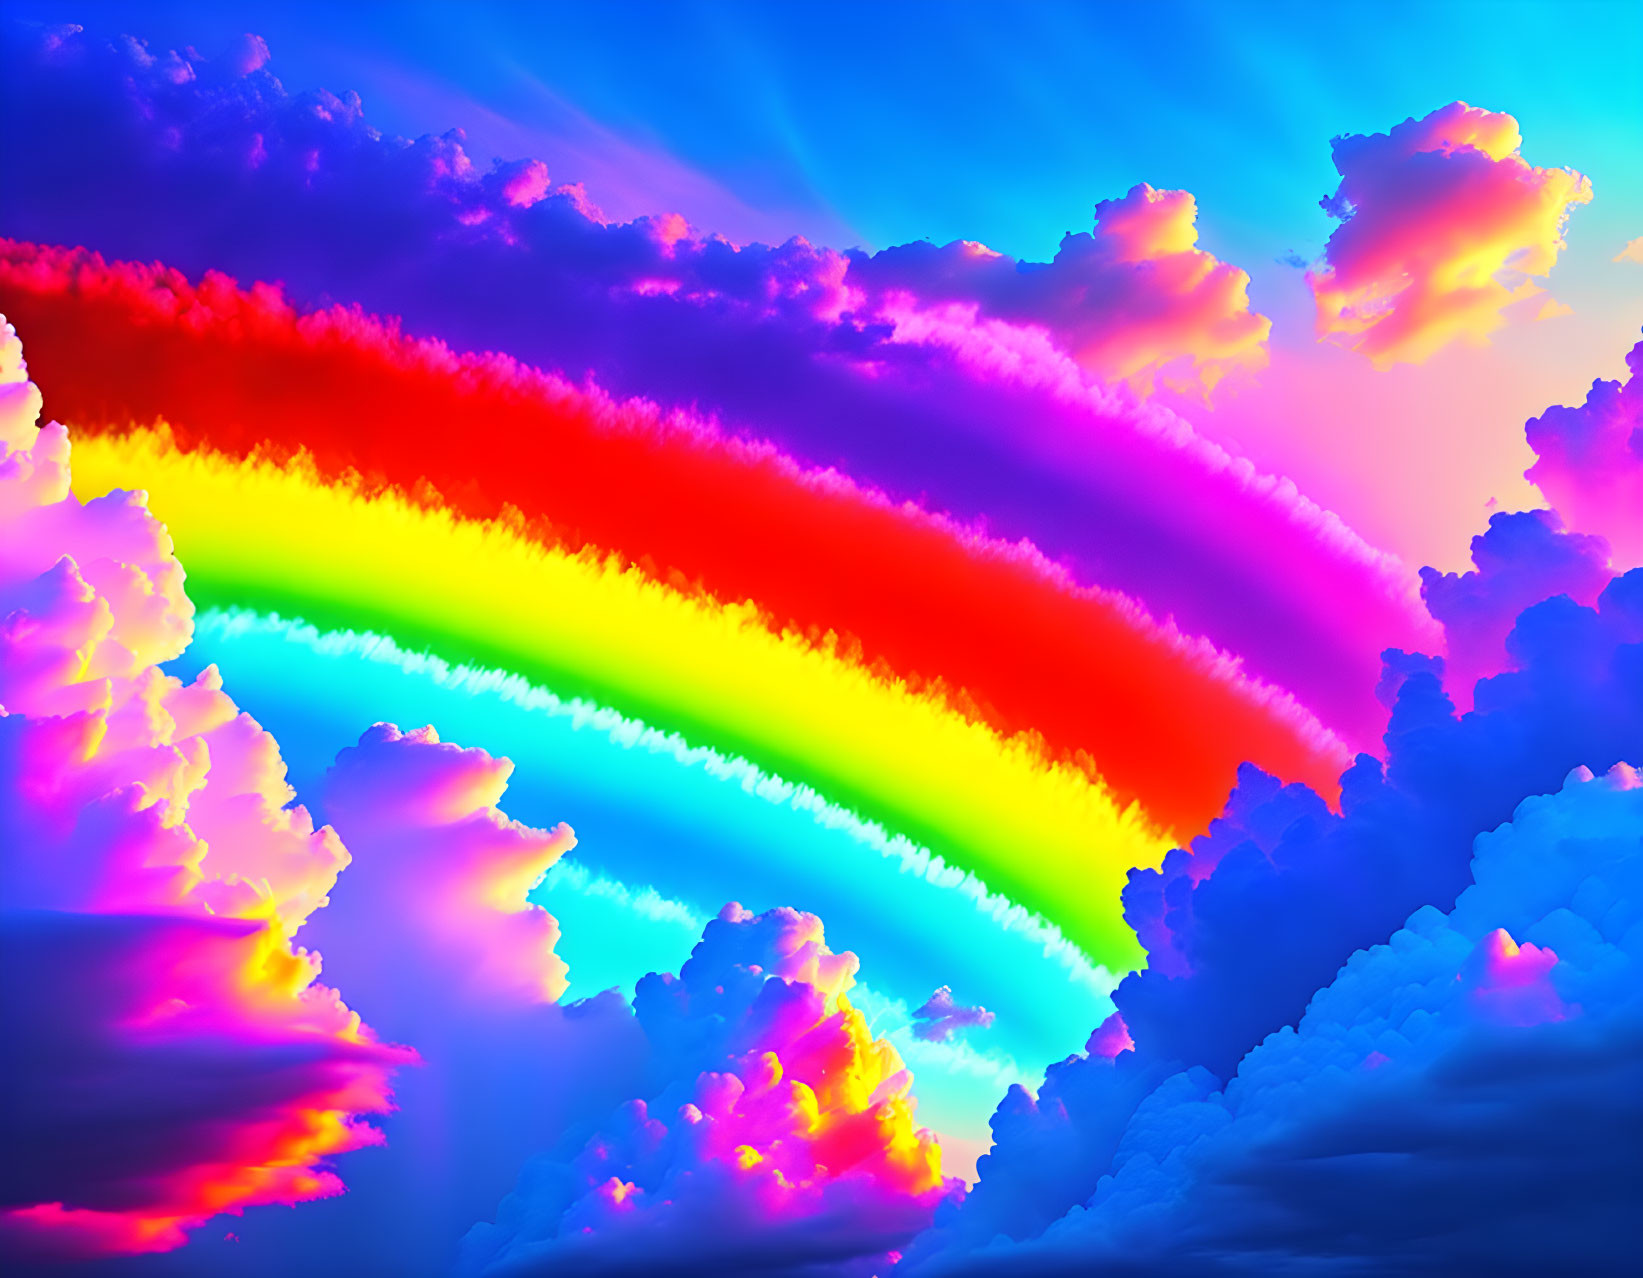 Colorful Rainbow Crossing Surreal Sky with Luminous Clouds